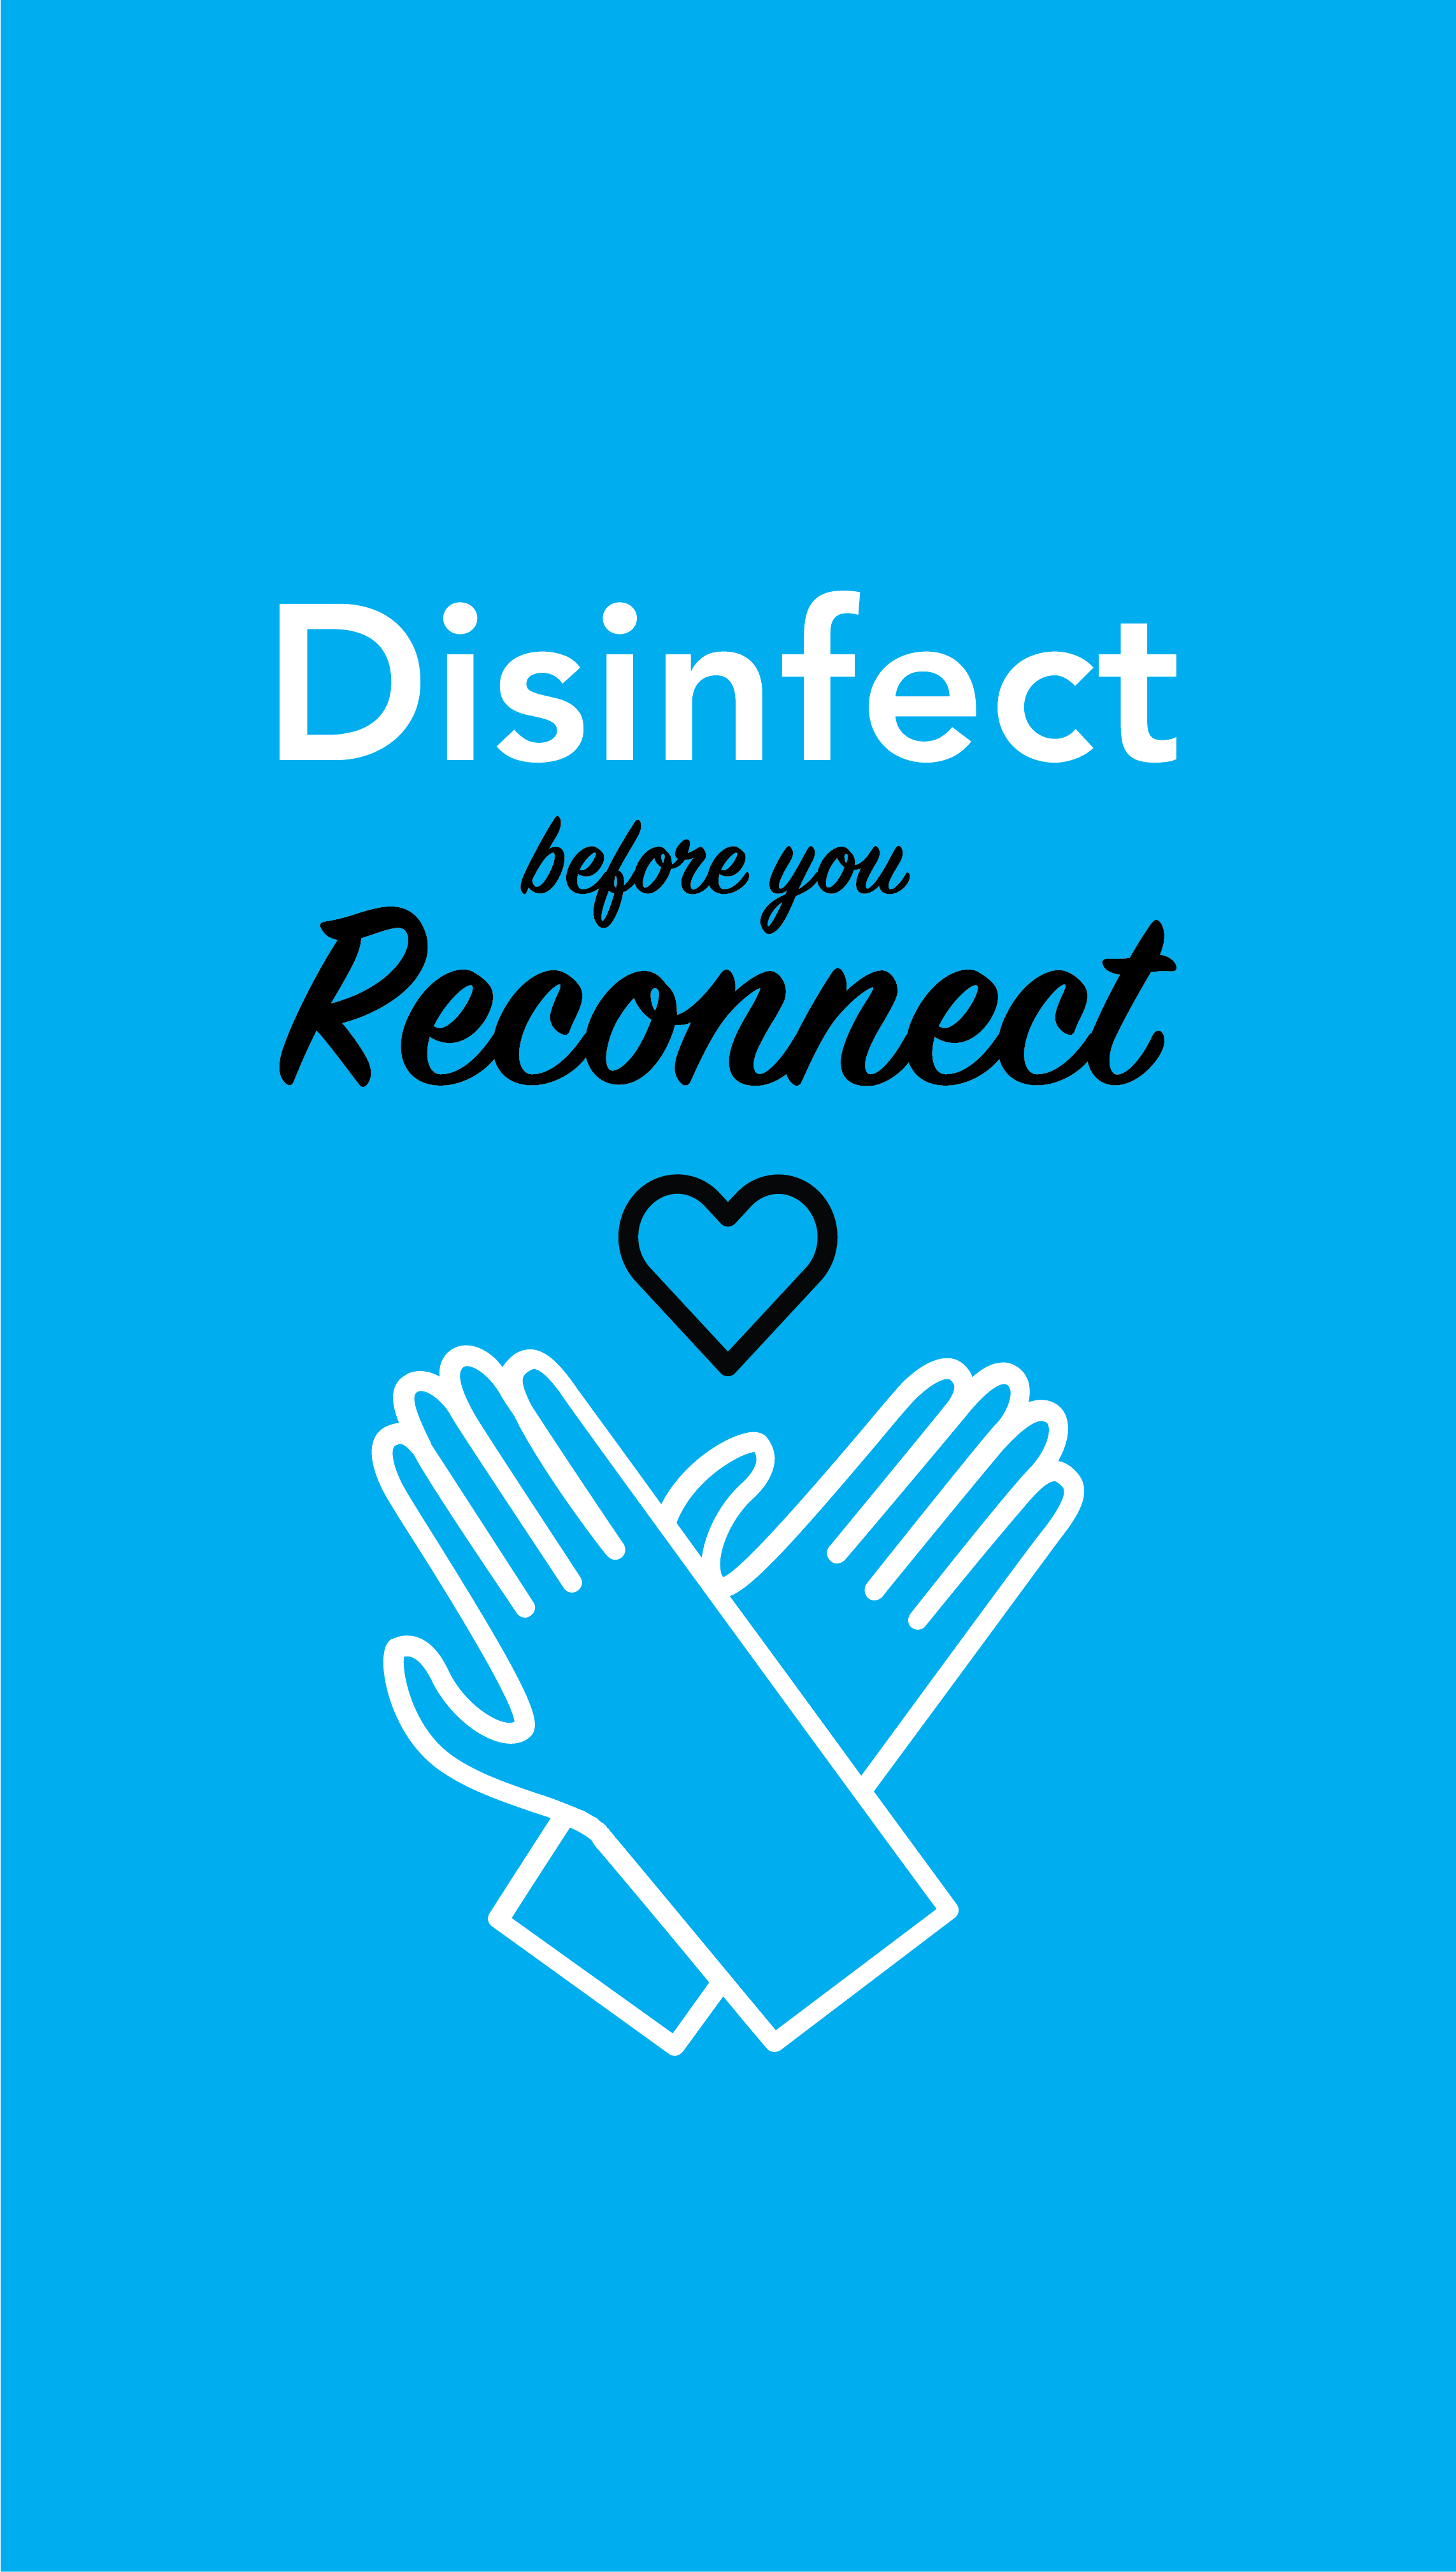 Disinfect before you reconnect with a heart below it and a pair of cleaning gloves